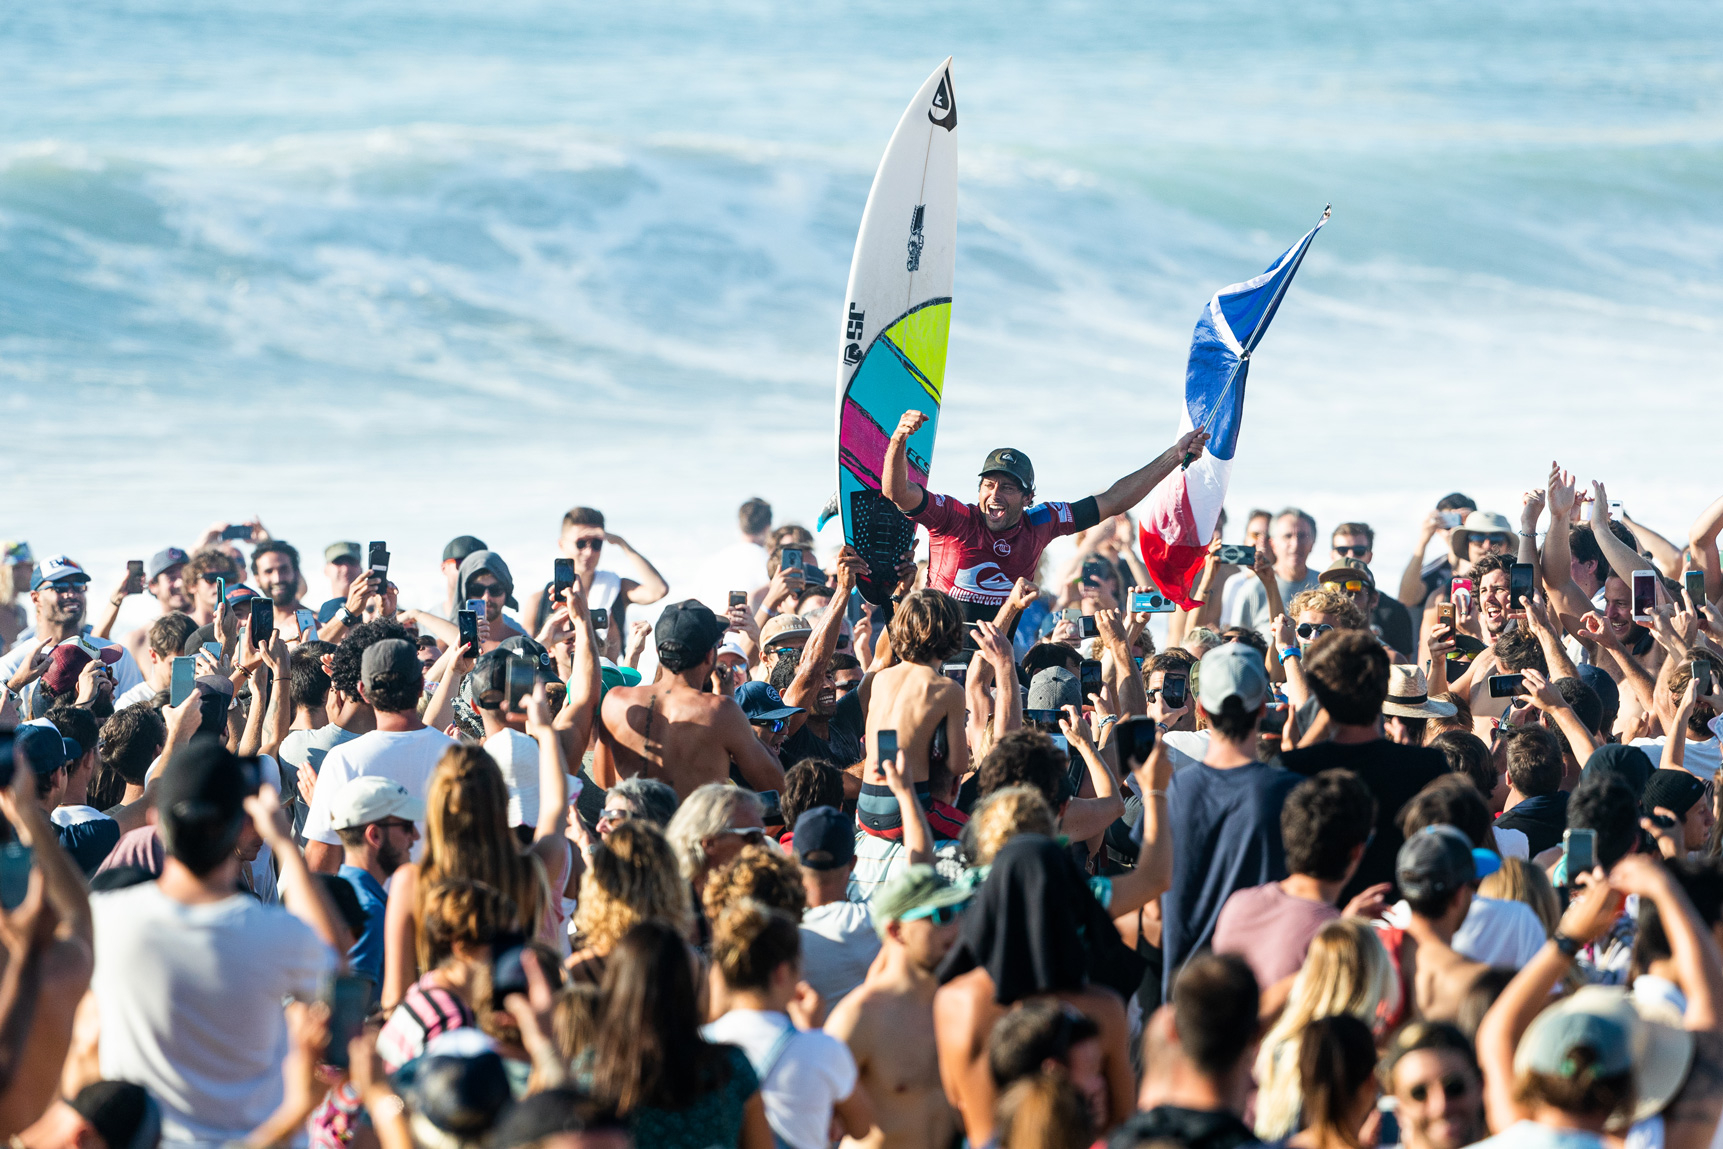 Jeremy Flores Chaired Up Beach Quiksilver Pro France